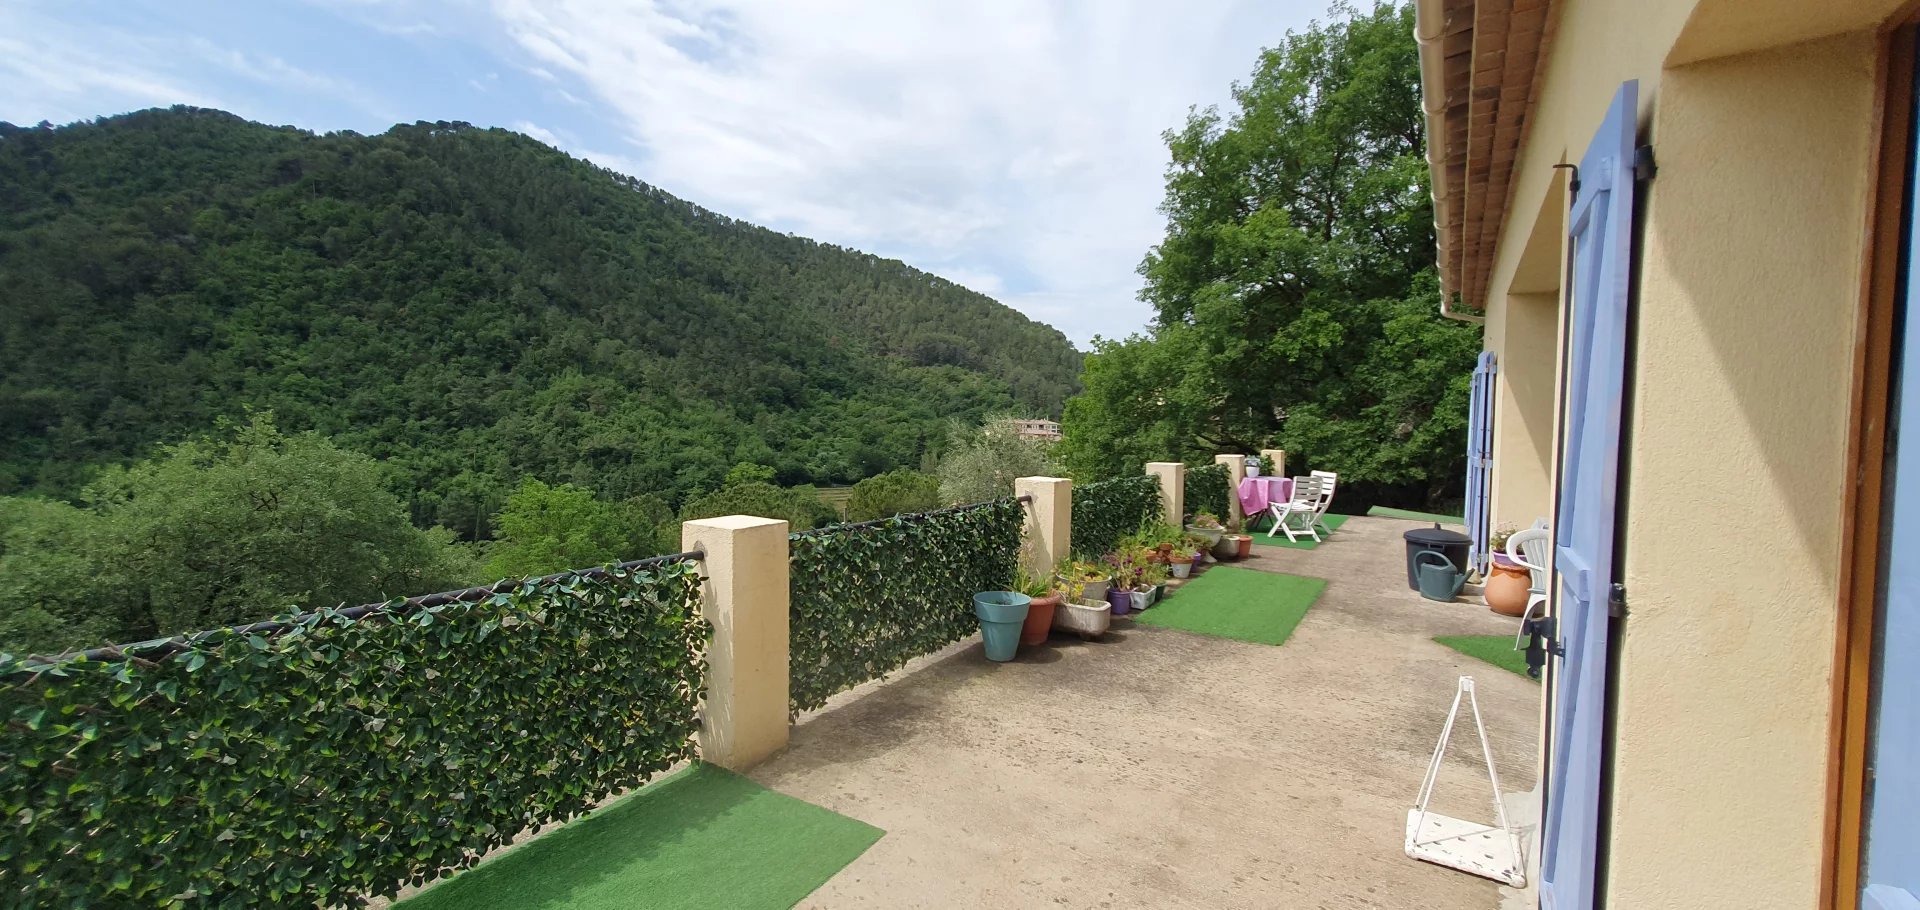 30 mins from Nice House 130m2 + 135m2 outbuildings